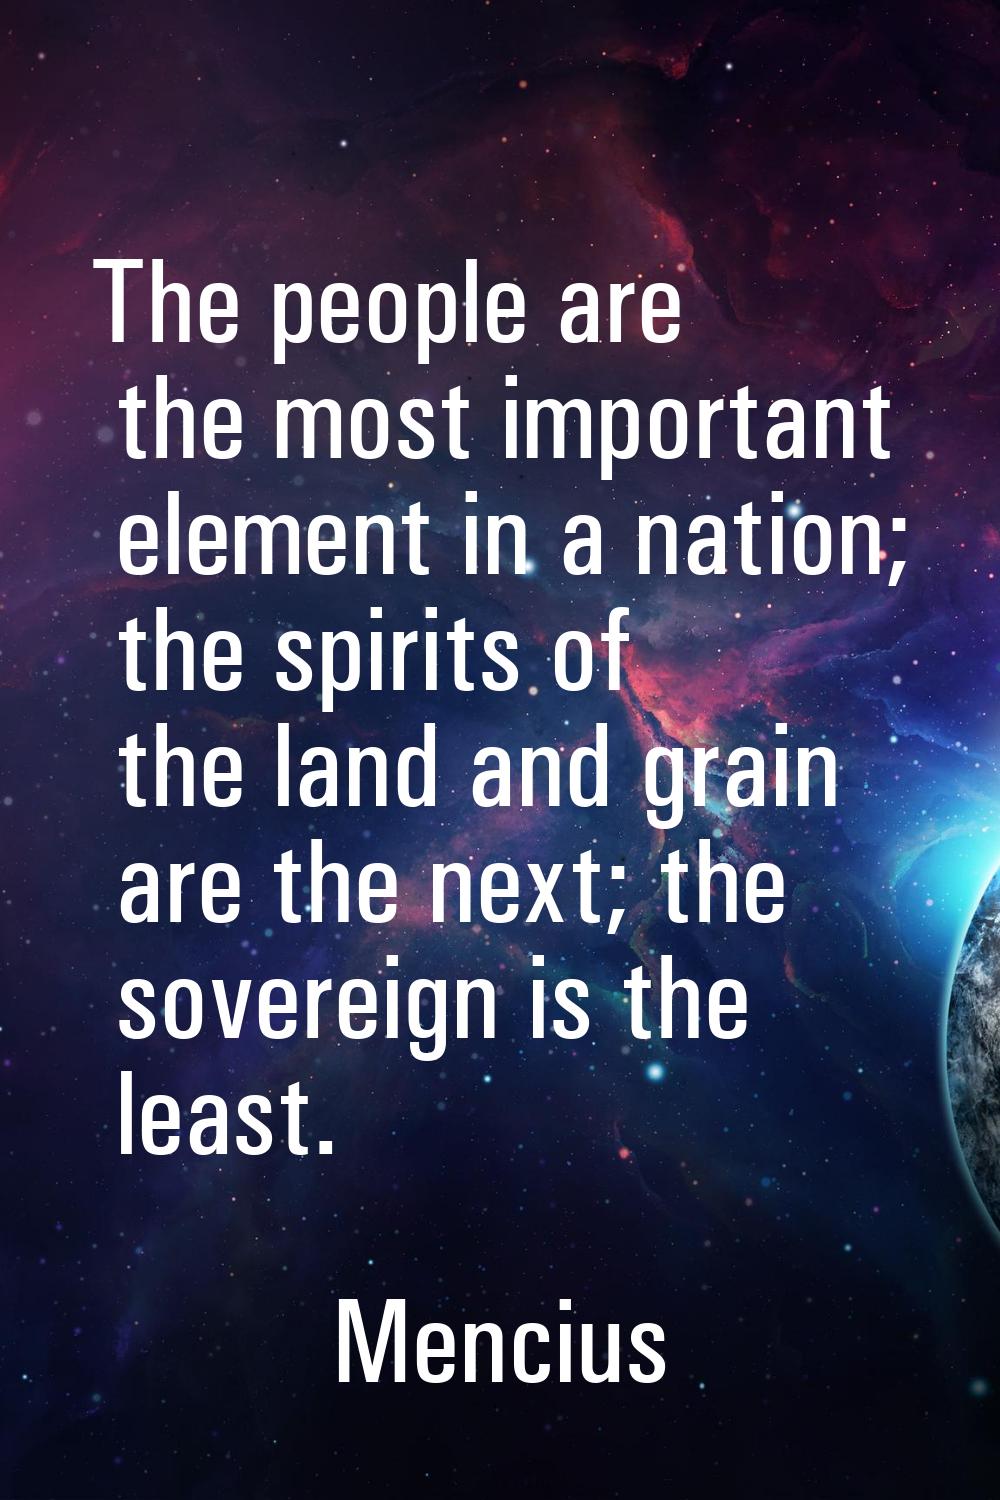 The people are the most important element in a nation; the spirits of the land and grain are the ne